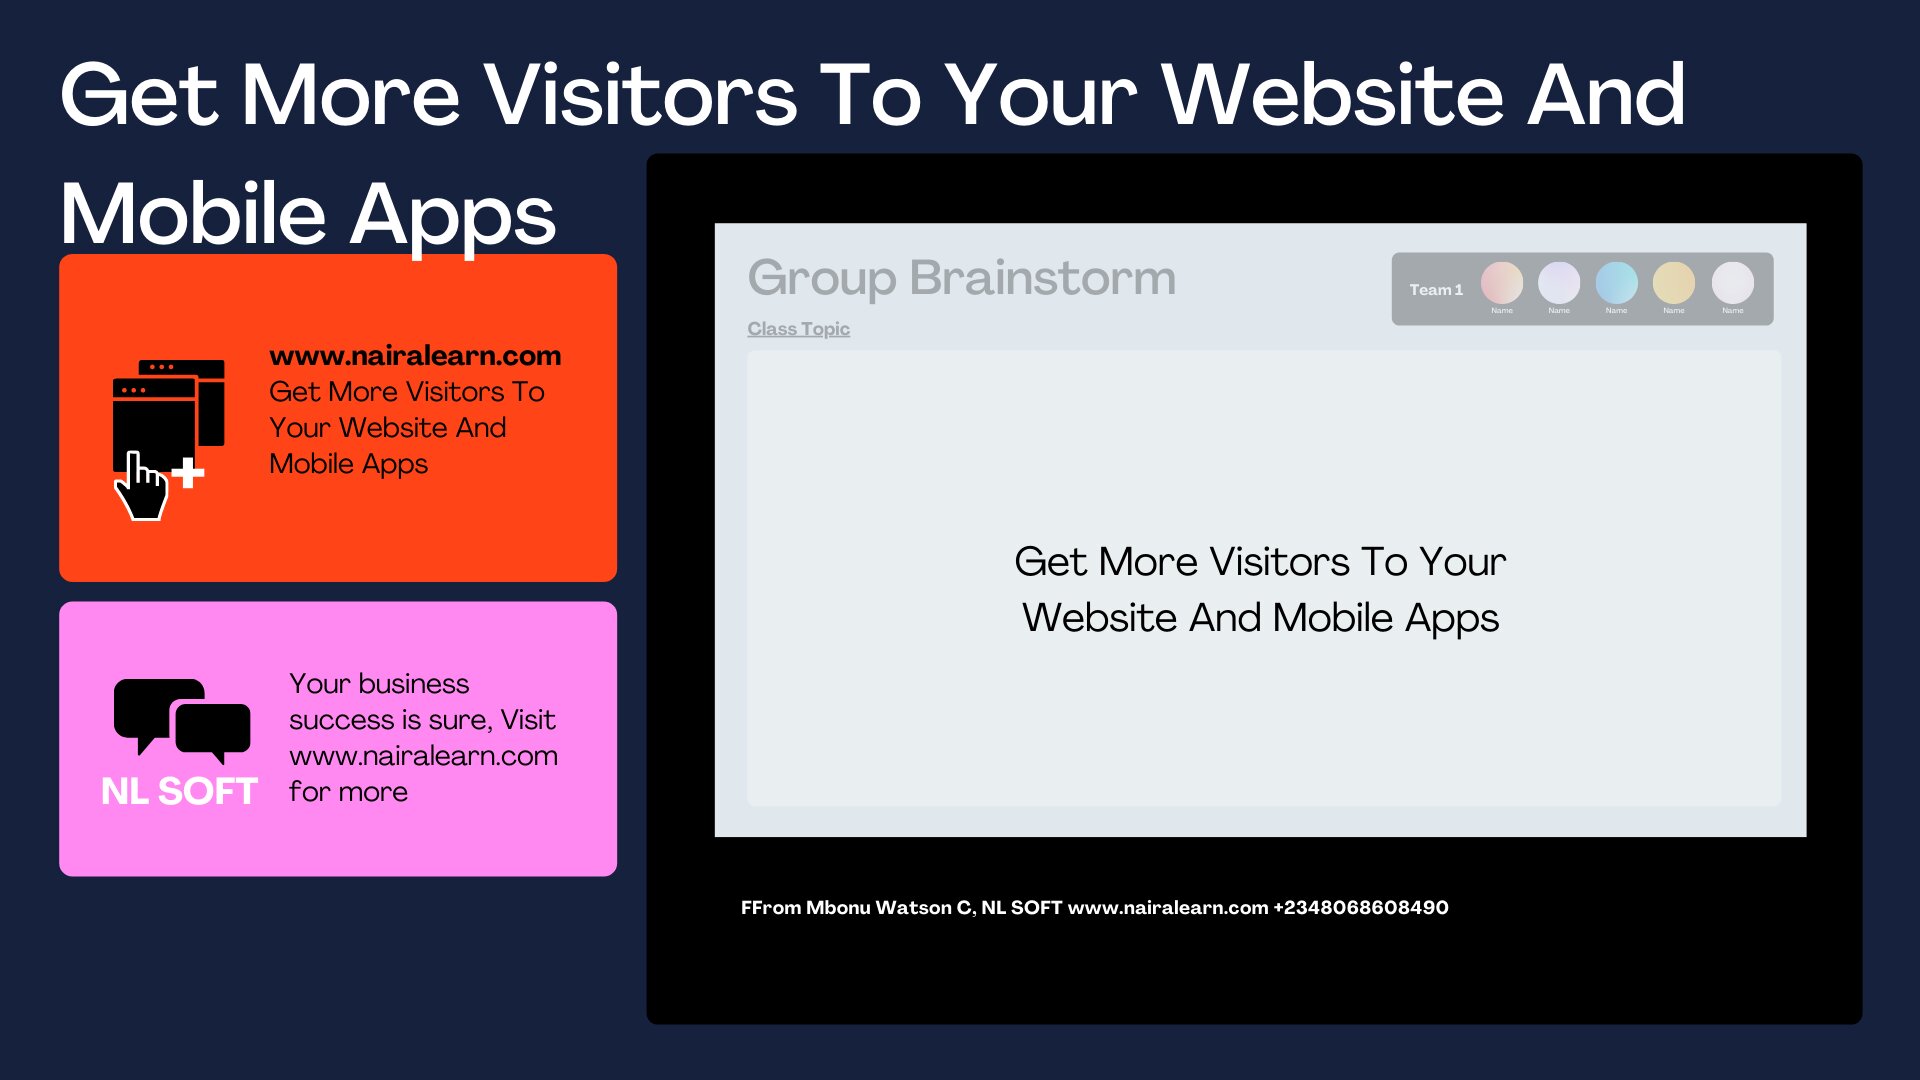 Get More Visitors To Your Website And Mobile Apps